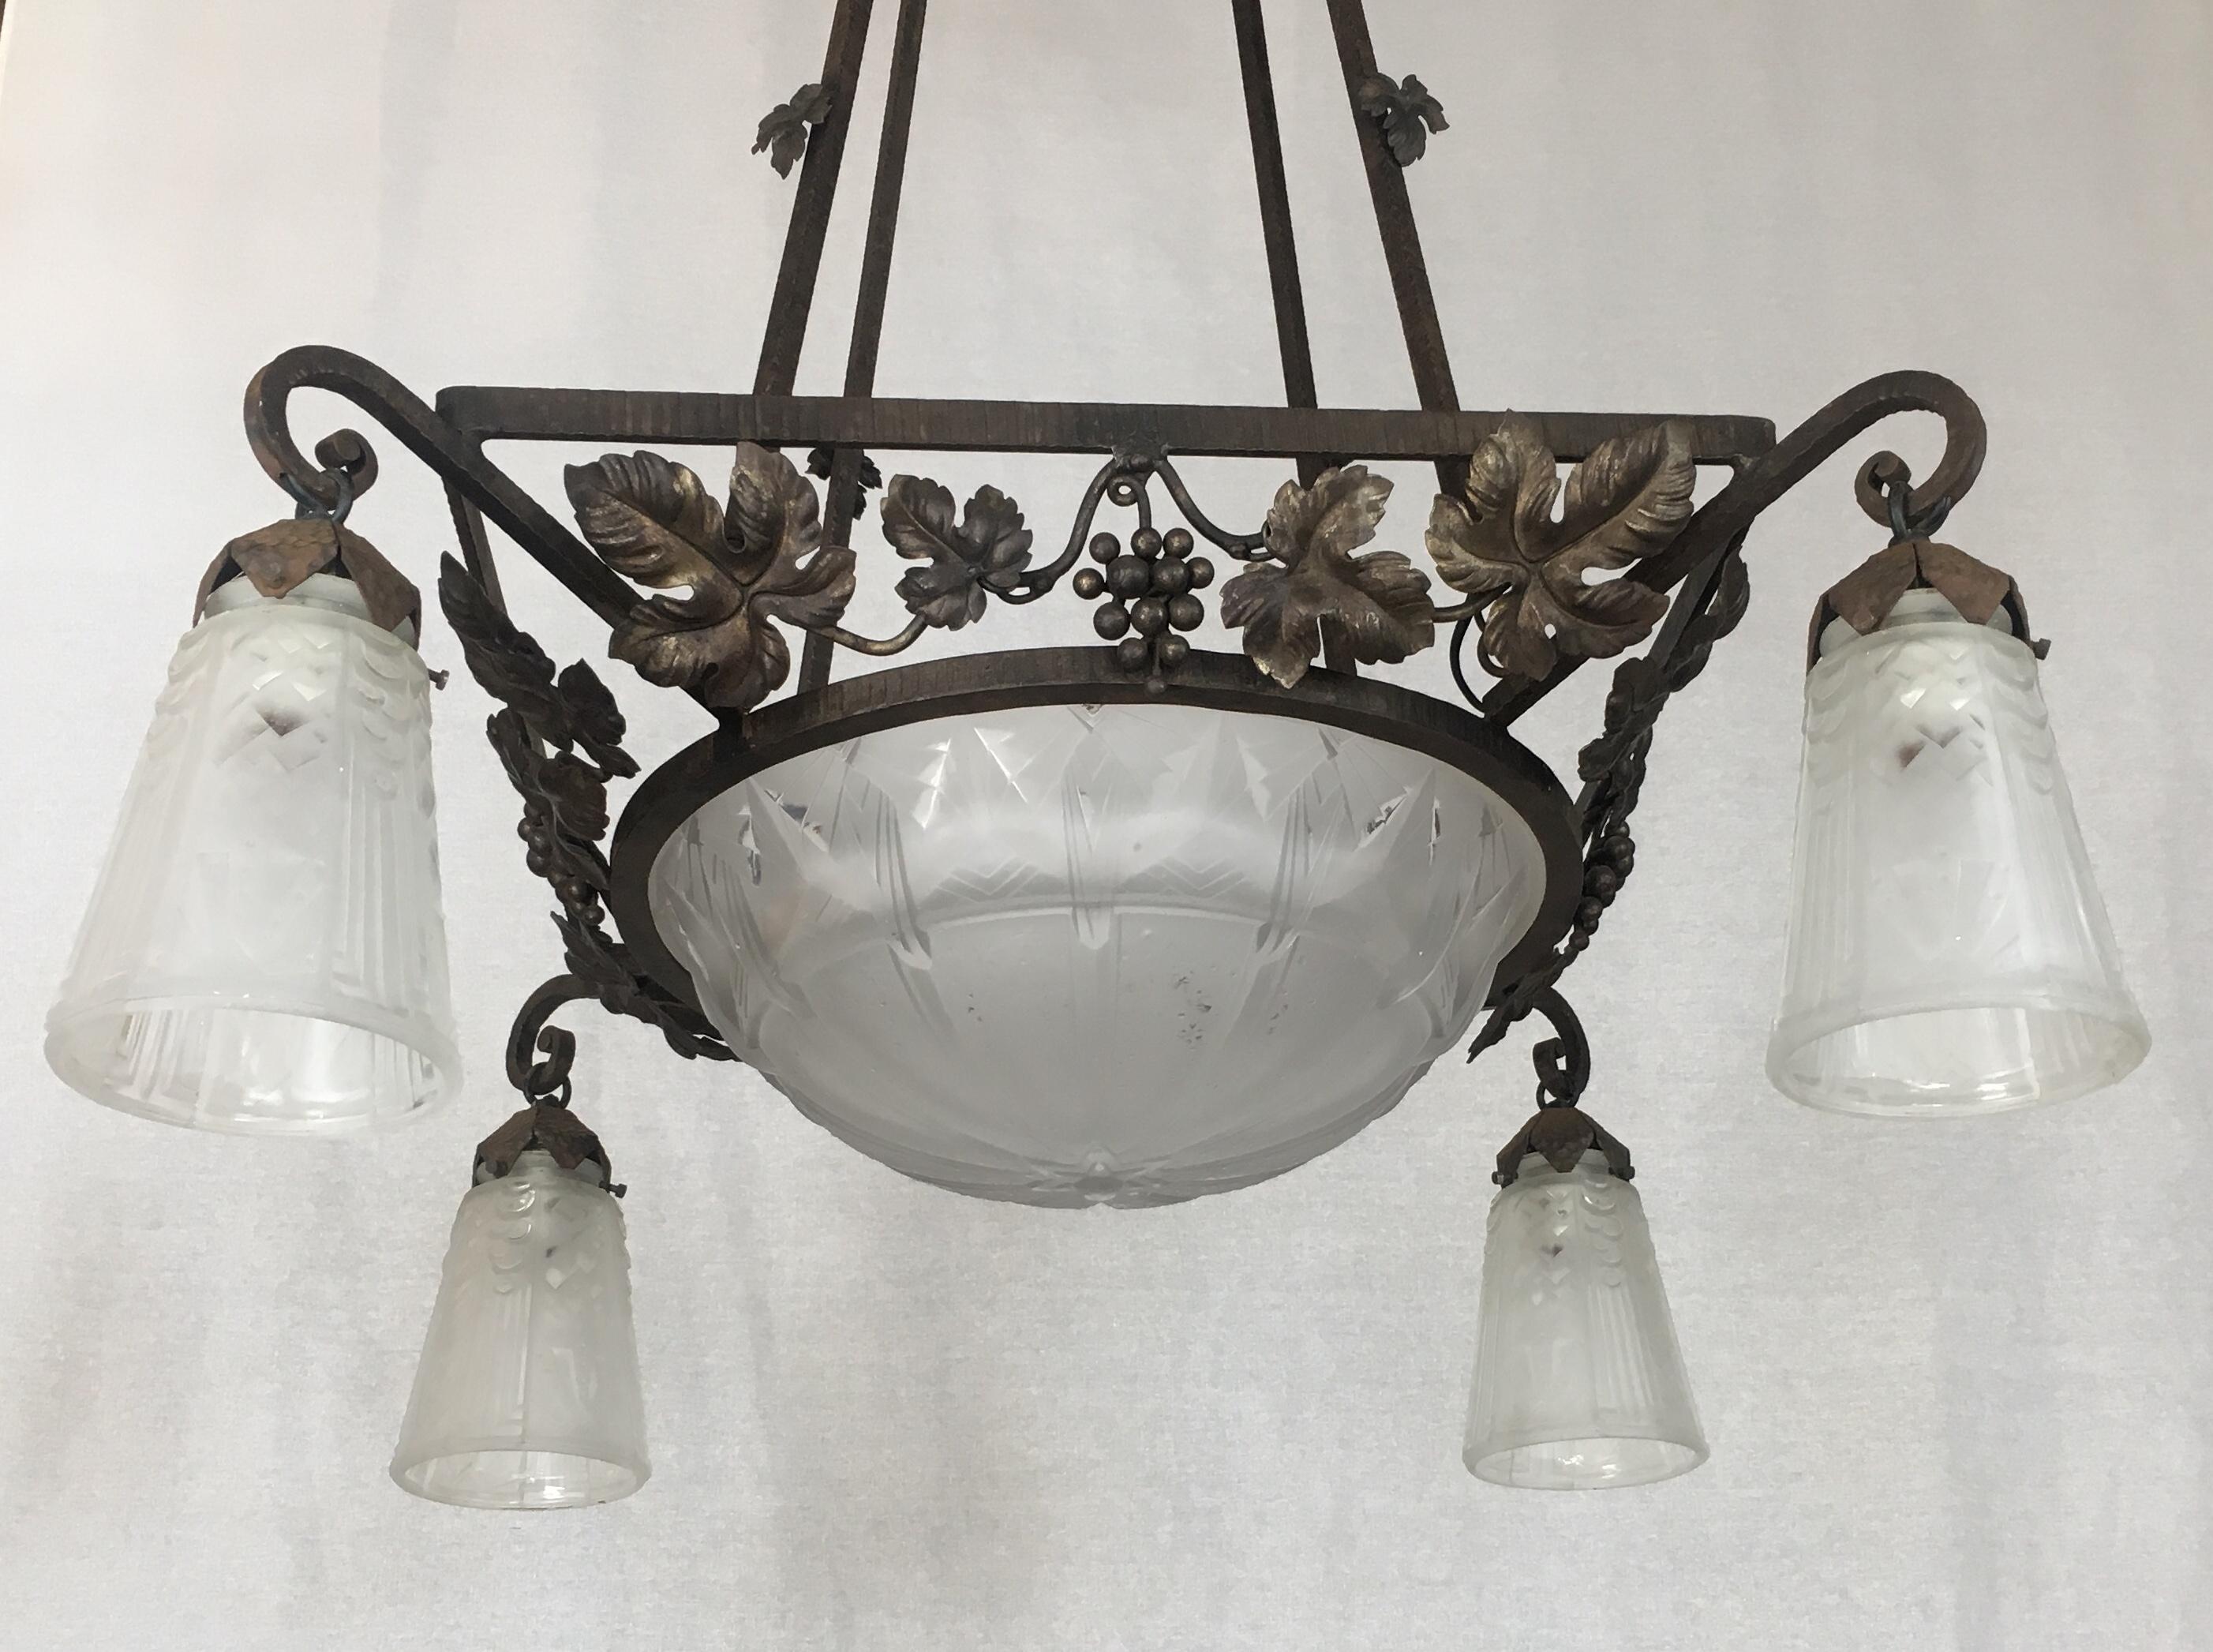 A stunning original classic Art Deco light fixture by Muller Frères. This eye-catching wrought iron chandelier features a frosted and etched glass dome and trumpet shades with geometrical forms. Hand-crafted in early 20th century, circa 1930. This